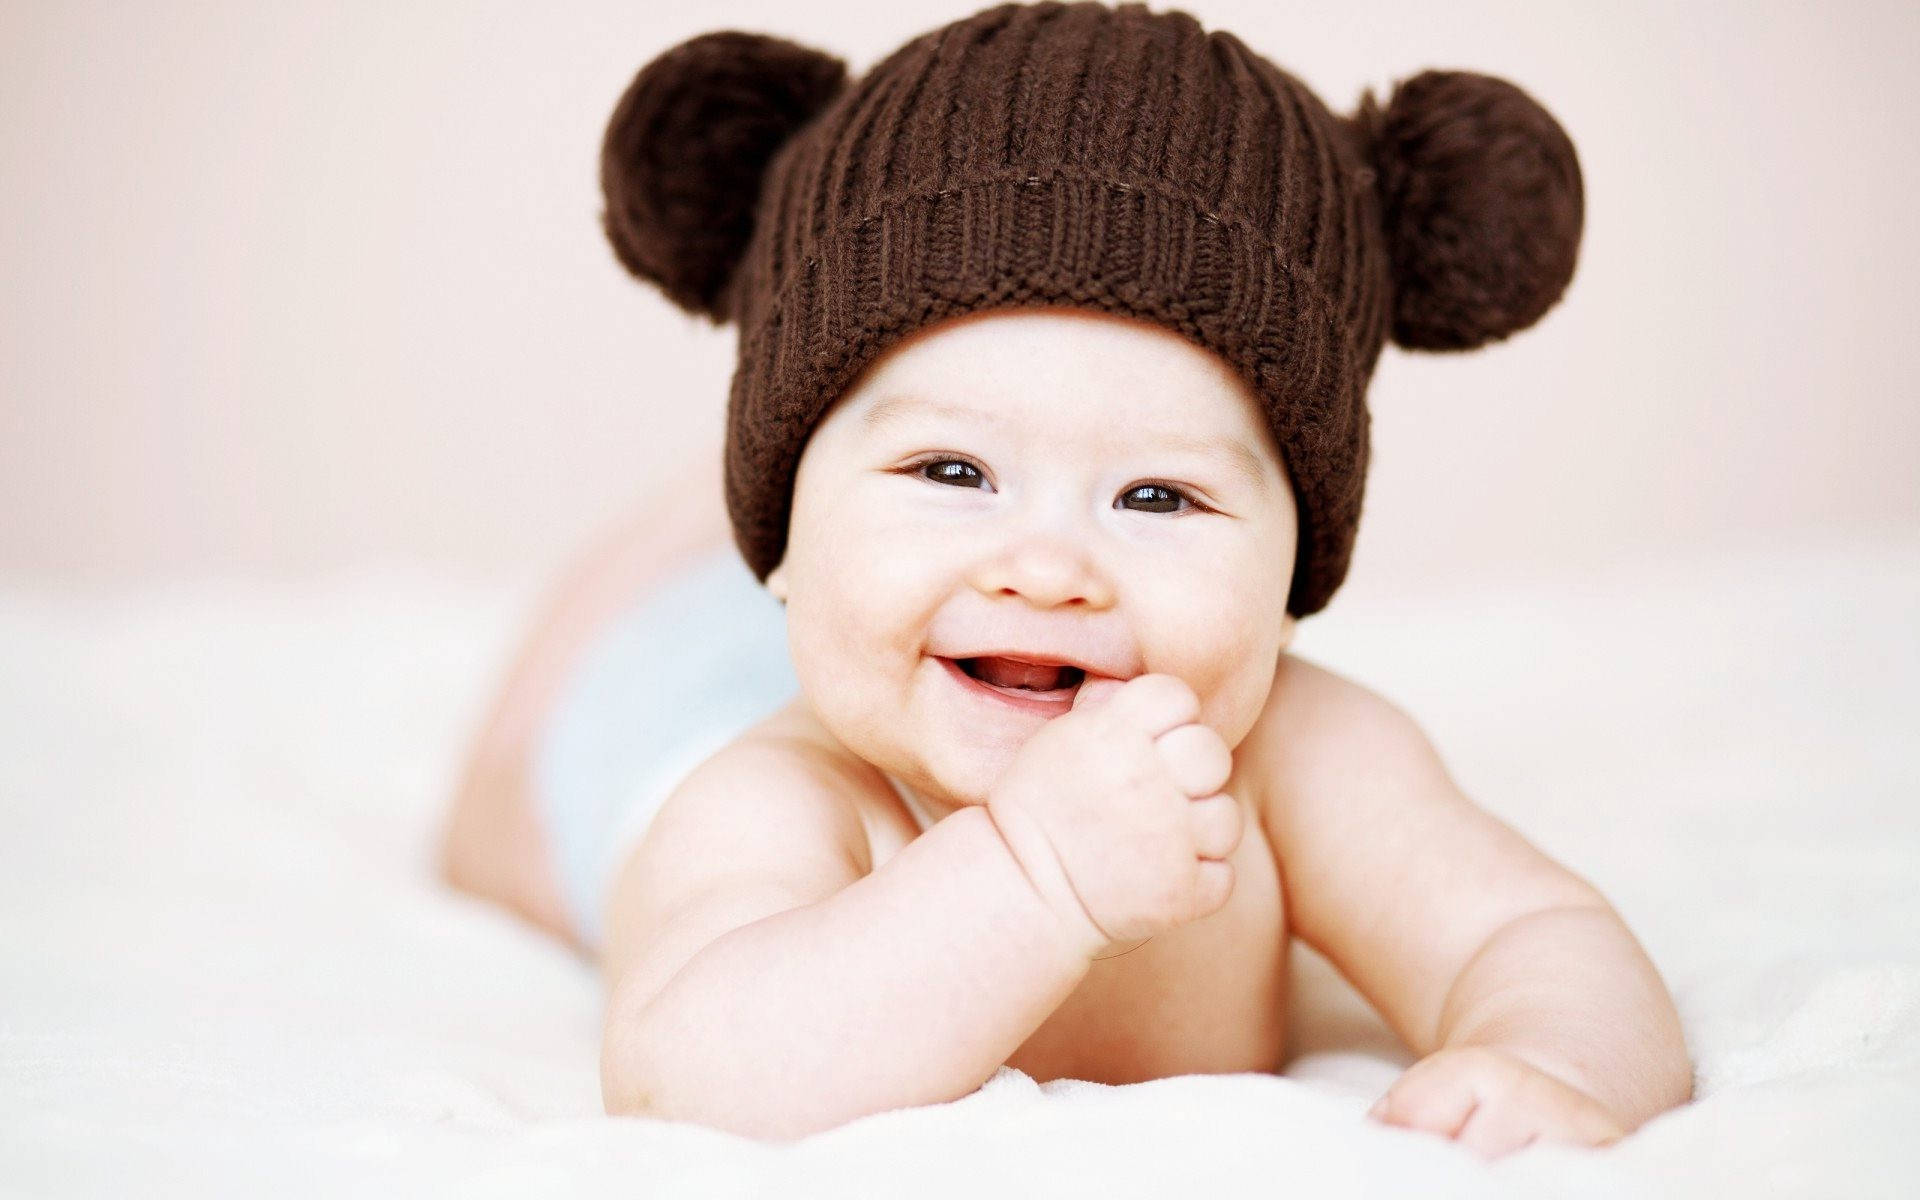 Adorable Baby Smile